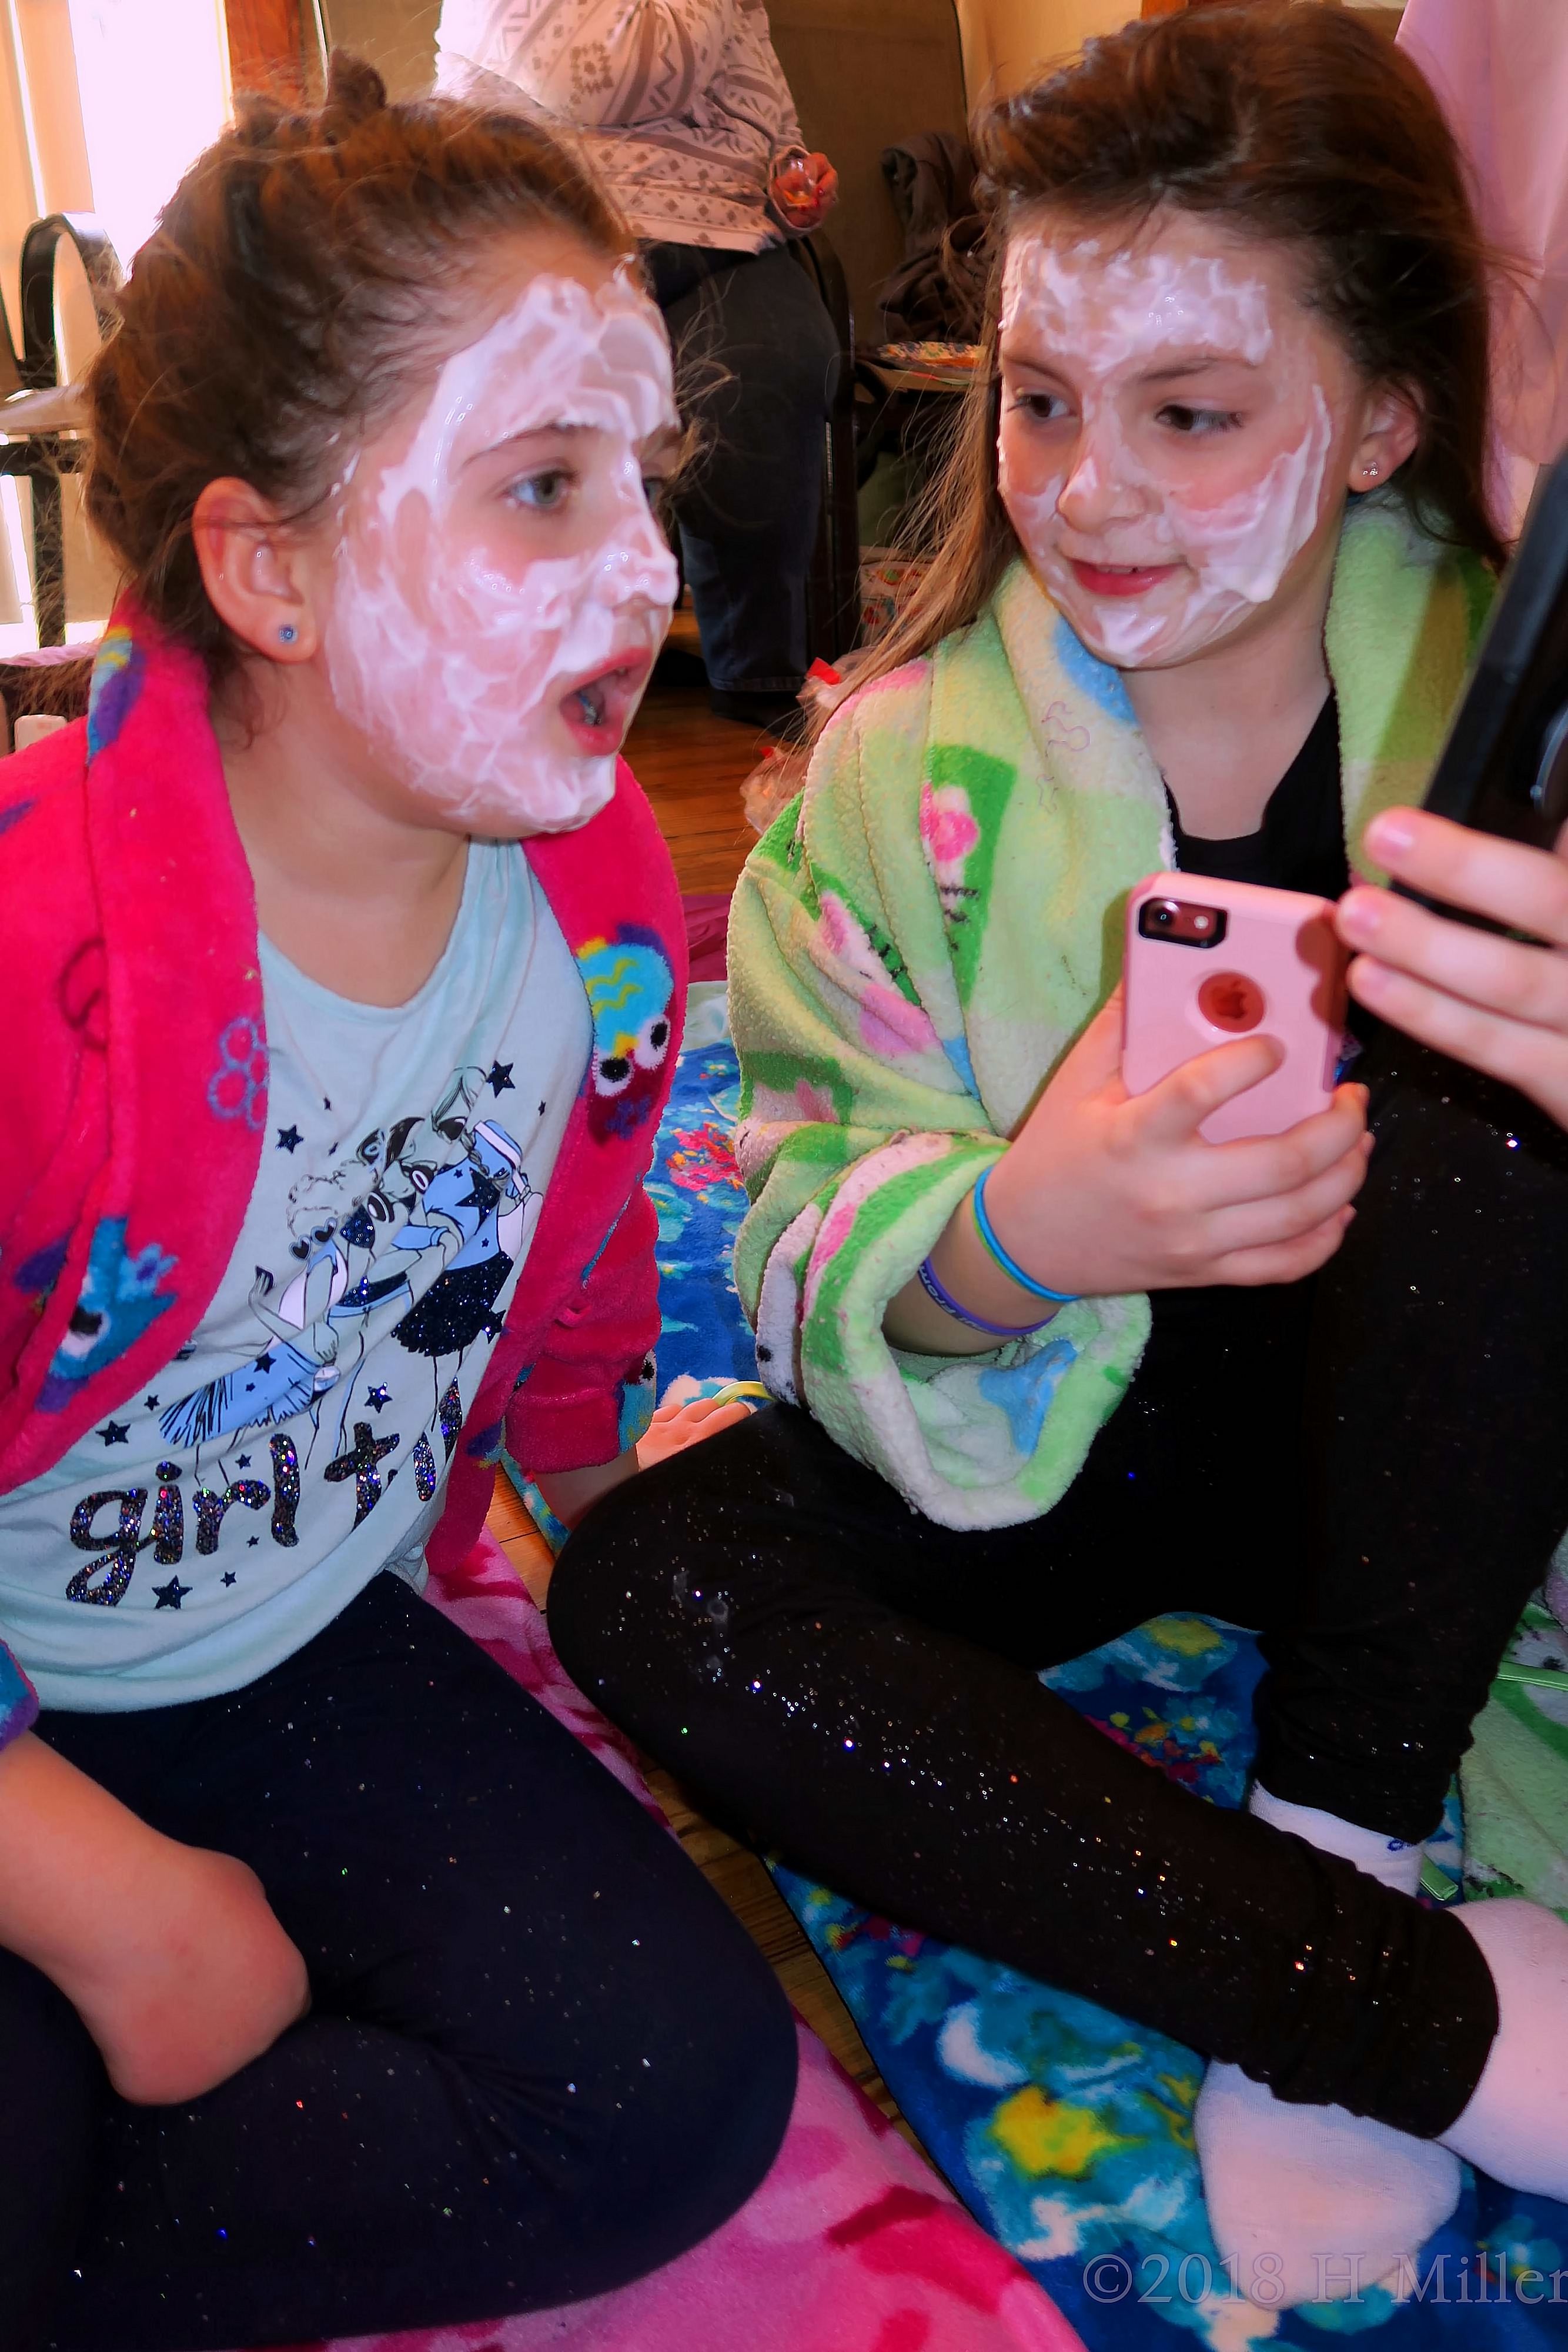 Playing On Phone While Kids Facials Dry! 